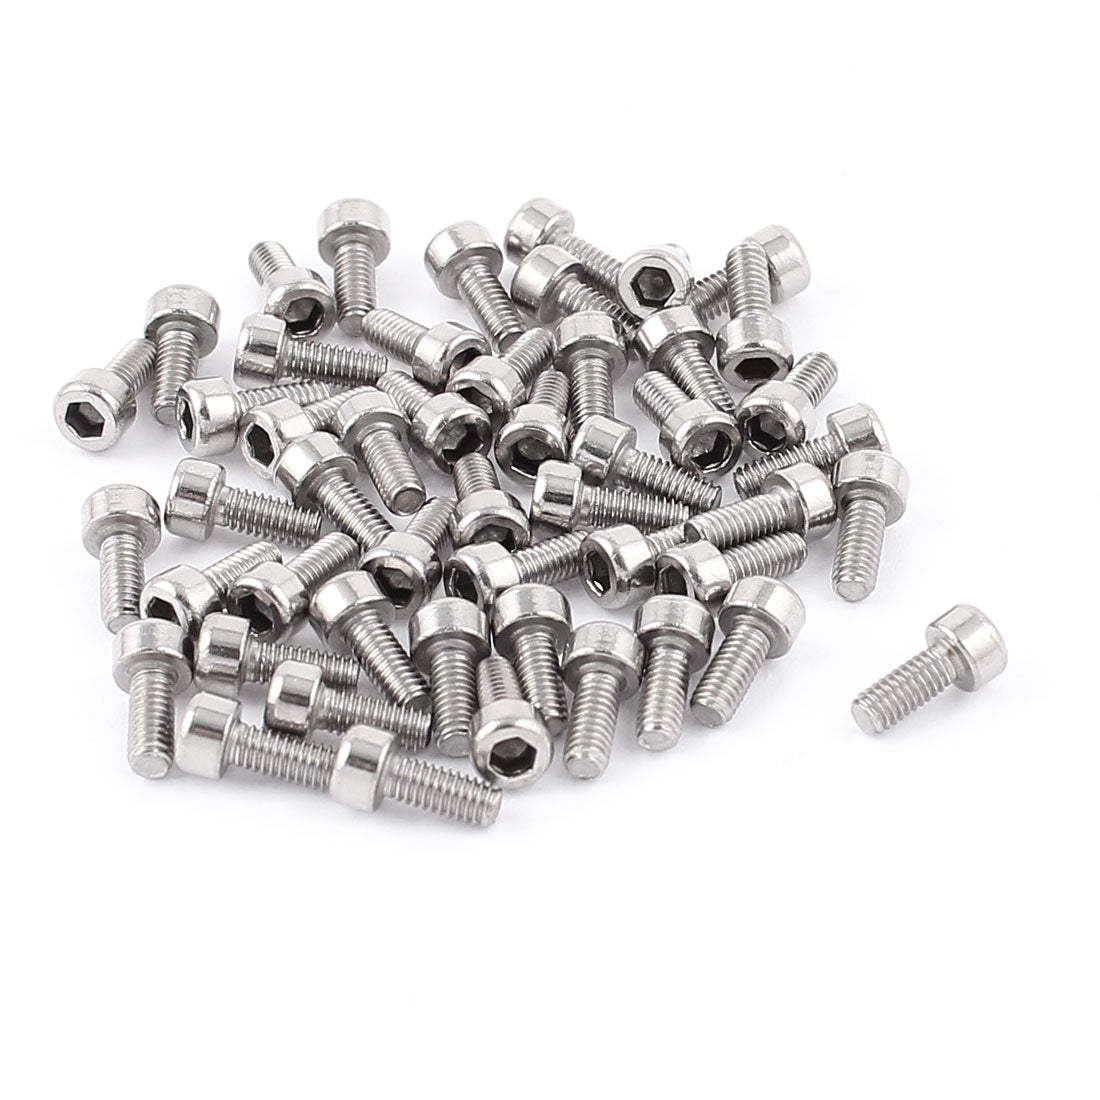 uxcell Uxcell 50 Pcs M2.5 x 6mm Metal Hex Socket Head Cap Screws Stainless Fully Thread